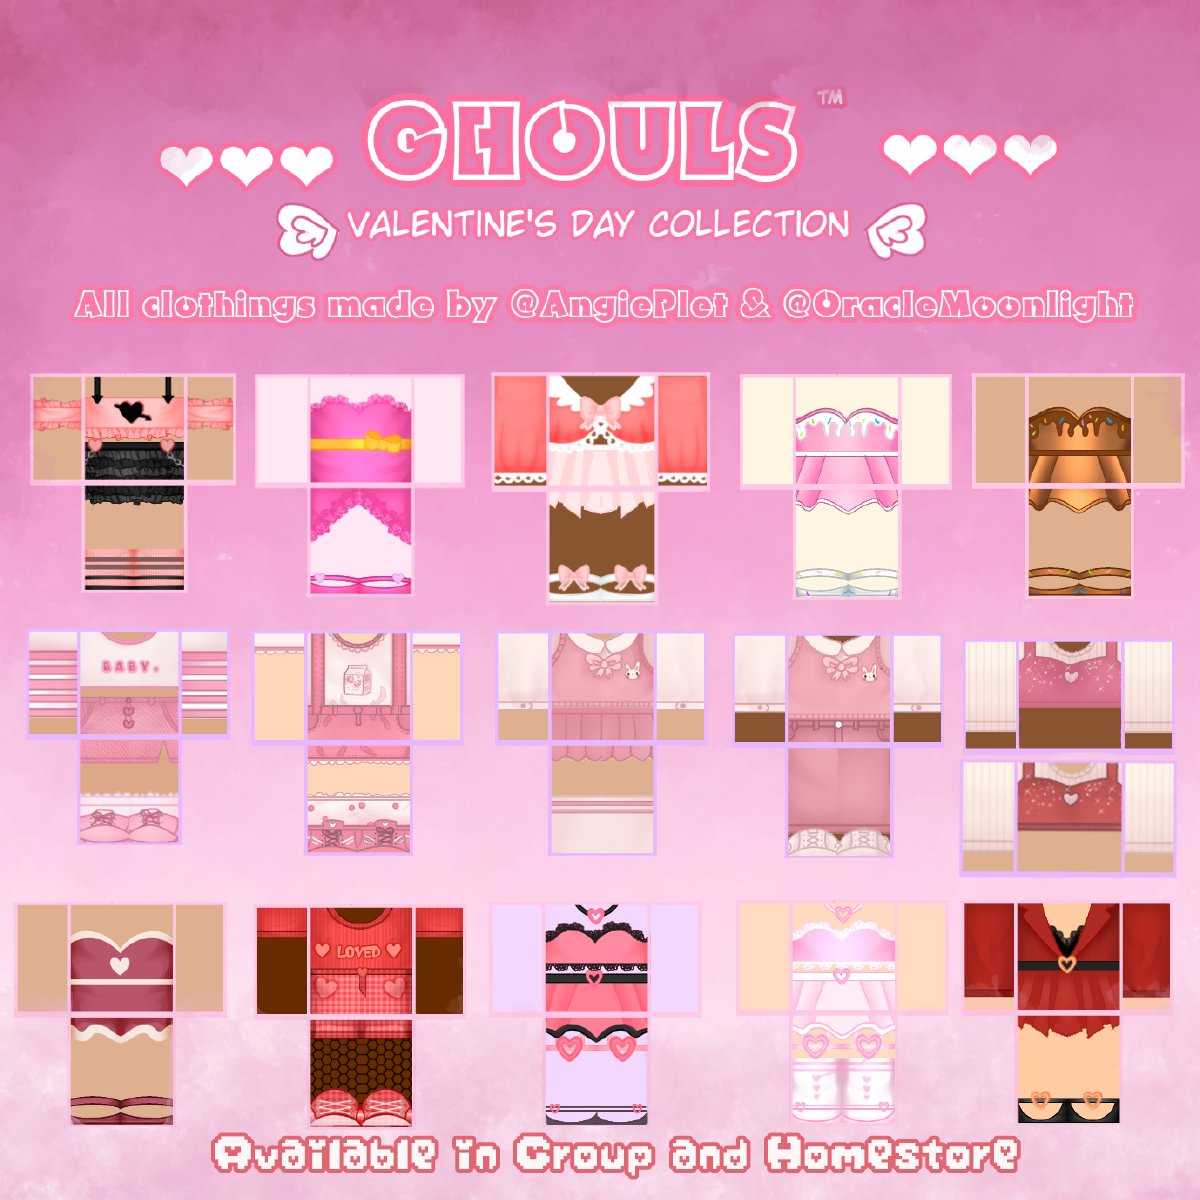 Oracle On Twitter Never Really Got A Chance To Showcase Them All Here But Here Are The Outfits Me And Pletspam Made For The Valentine S Day Purchase From Group Https T Co Gq74yzfucd Roblox Royalehigh - best roblox clothing groups 2020